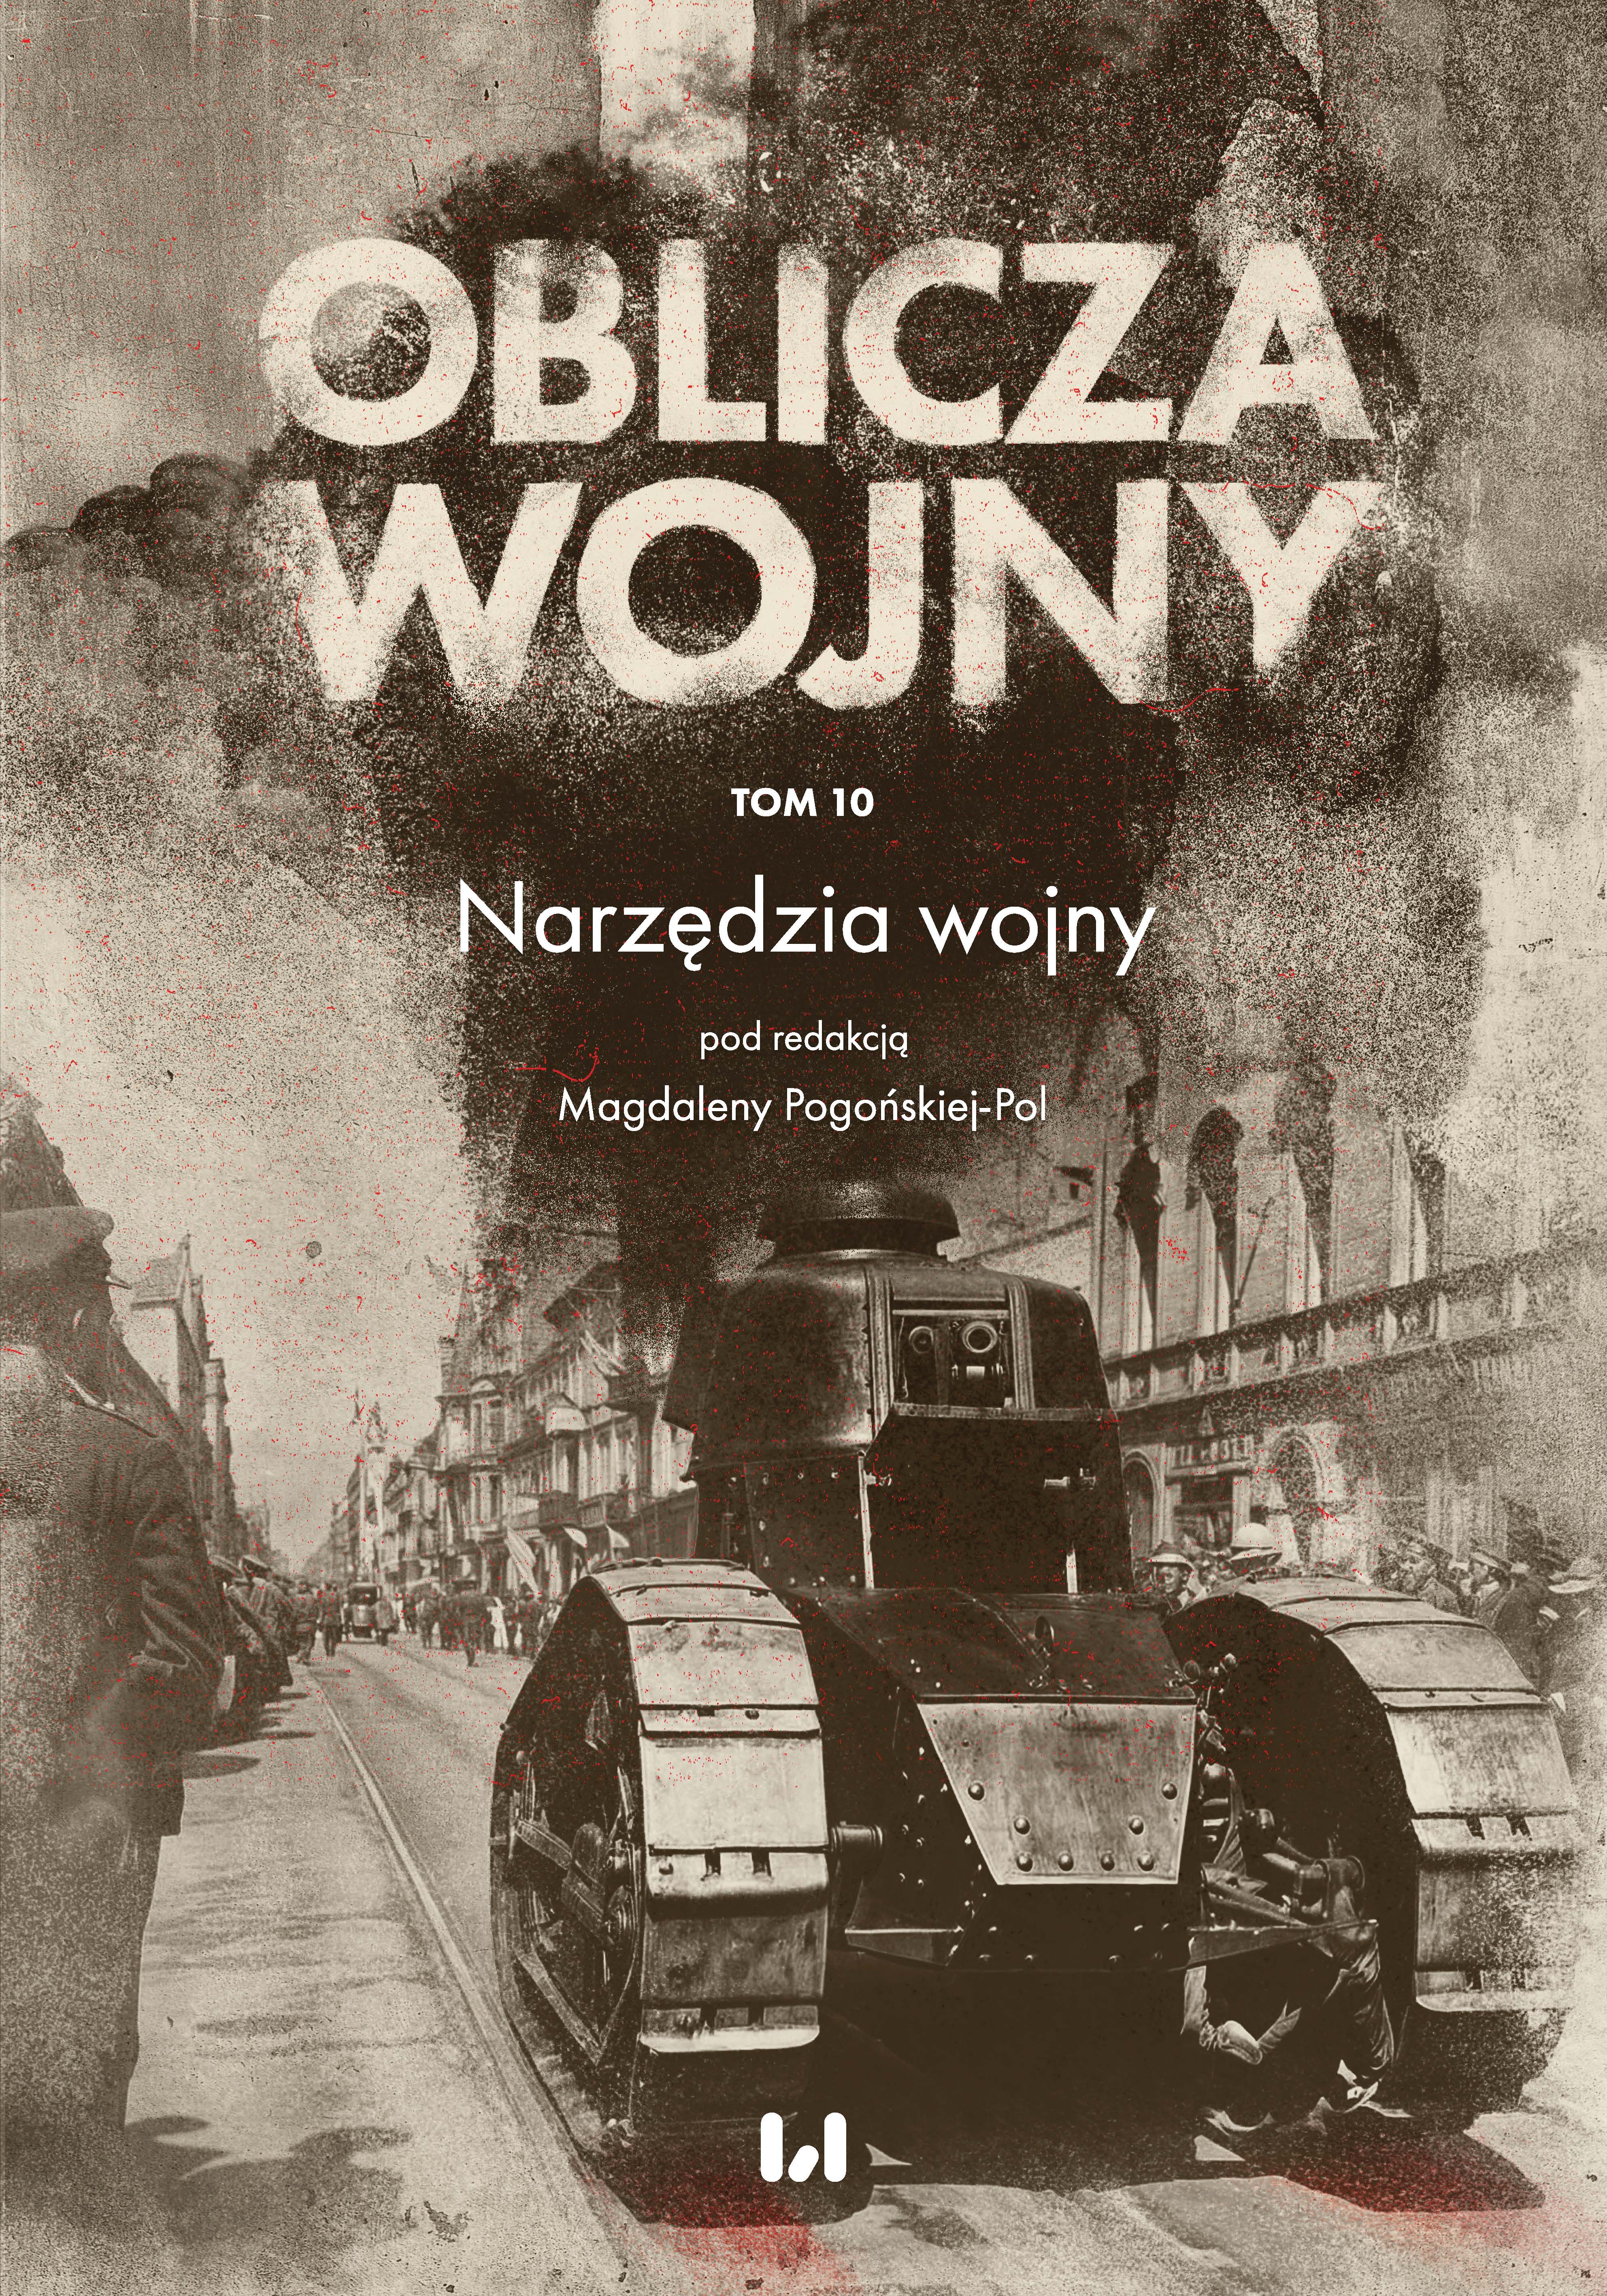 Diplomatic Tools and Tools of War: Activities of the Polish Office in Casablanca during Second World War – a Case Study Cover Image